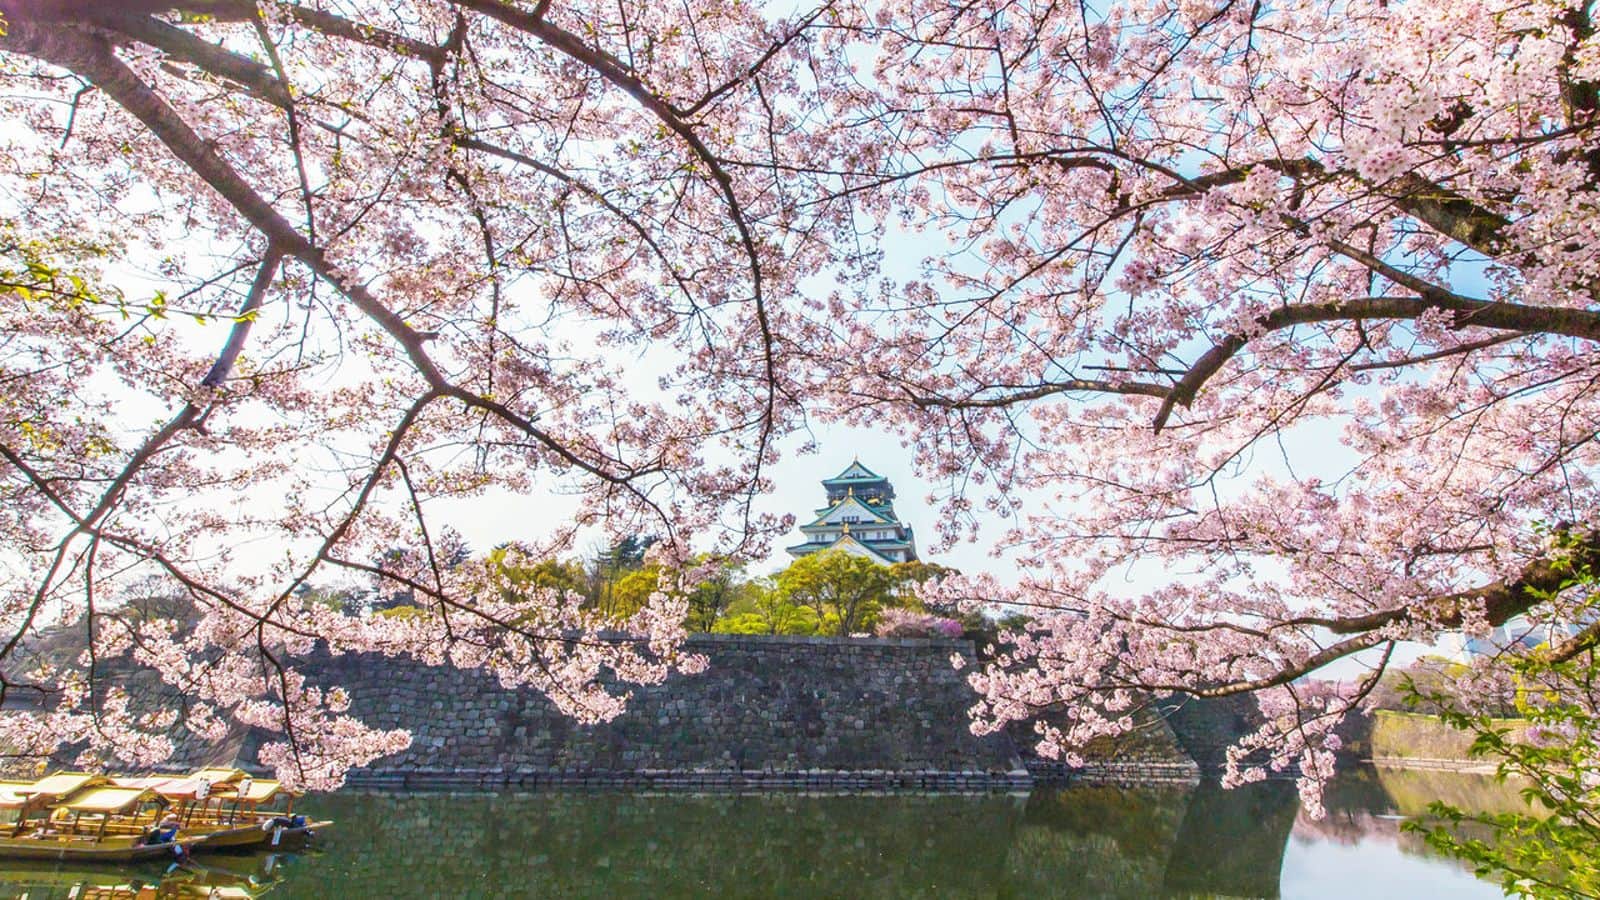 Witness Osaka's cherry blossom extravaganza: A springtime must-see